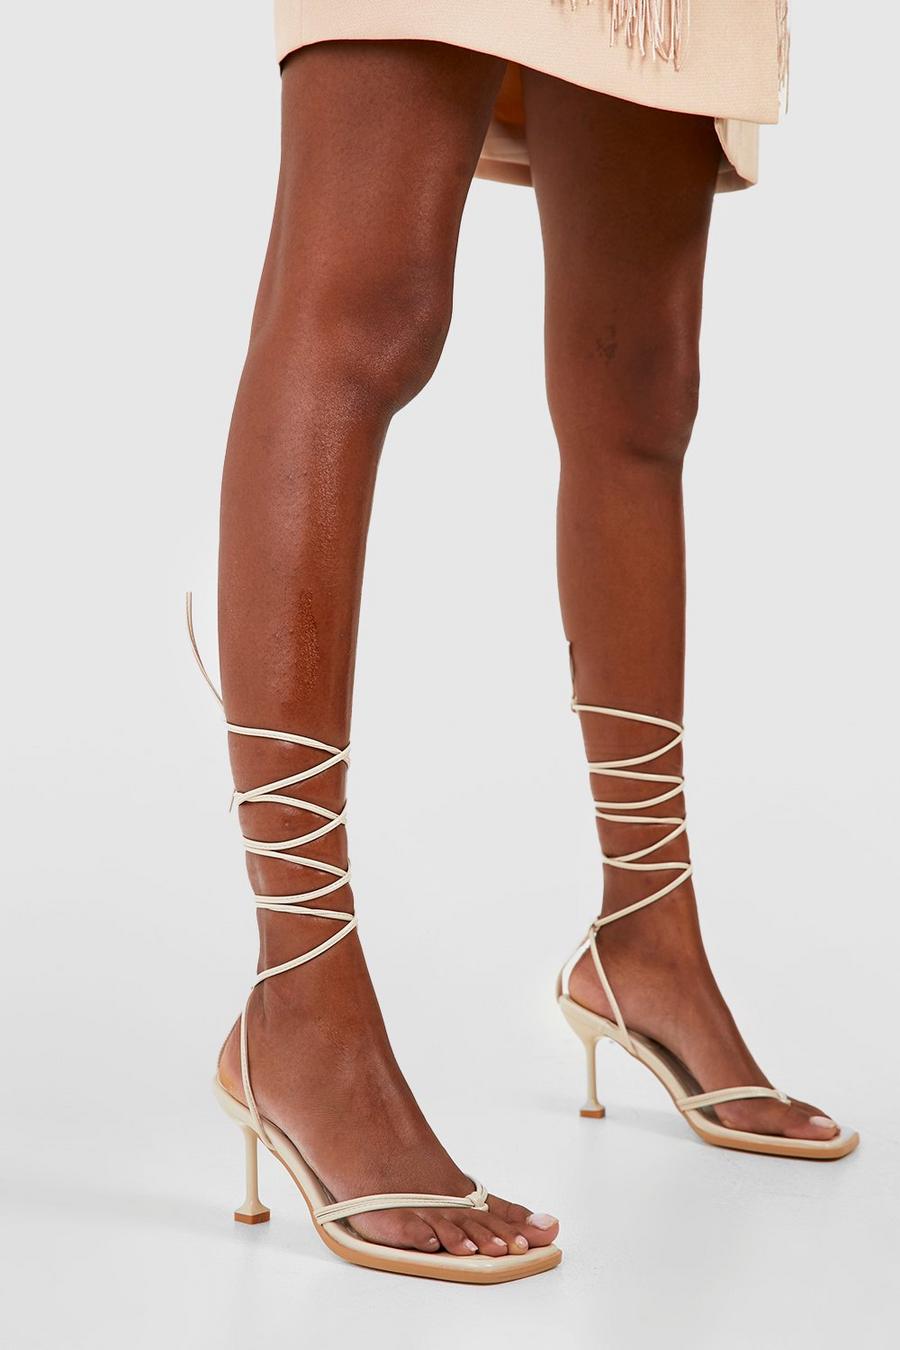 Cream blanco Padded Insole Strappy Lace Up Heels